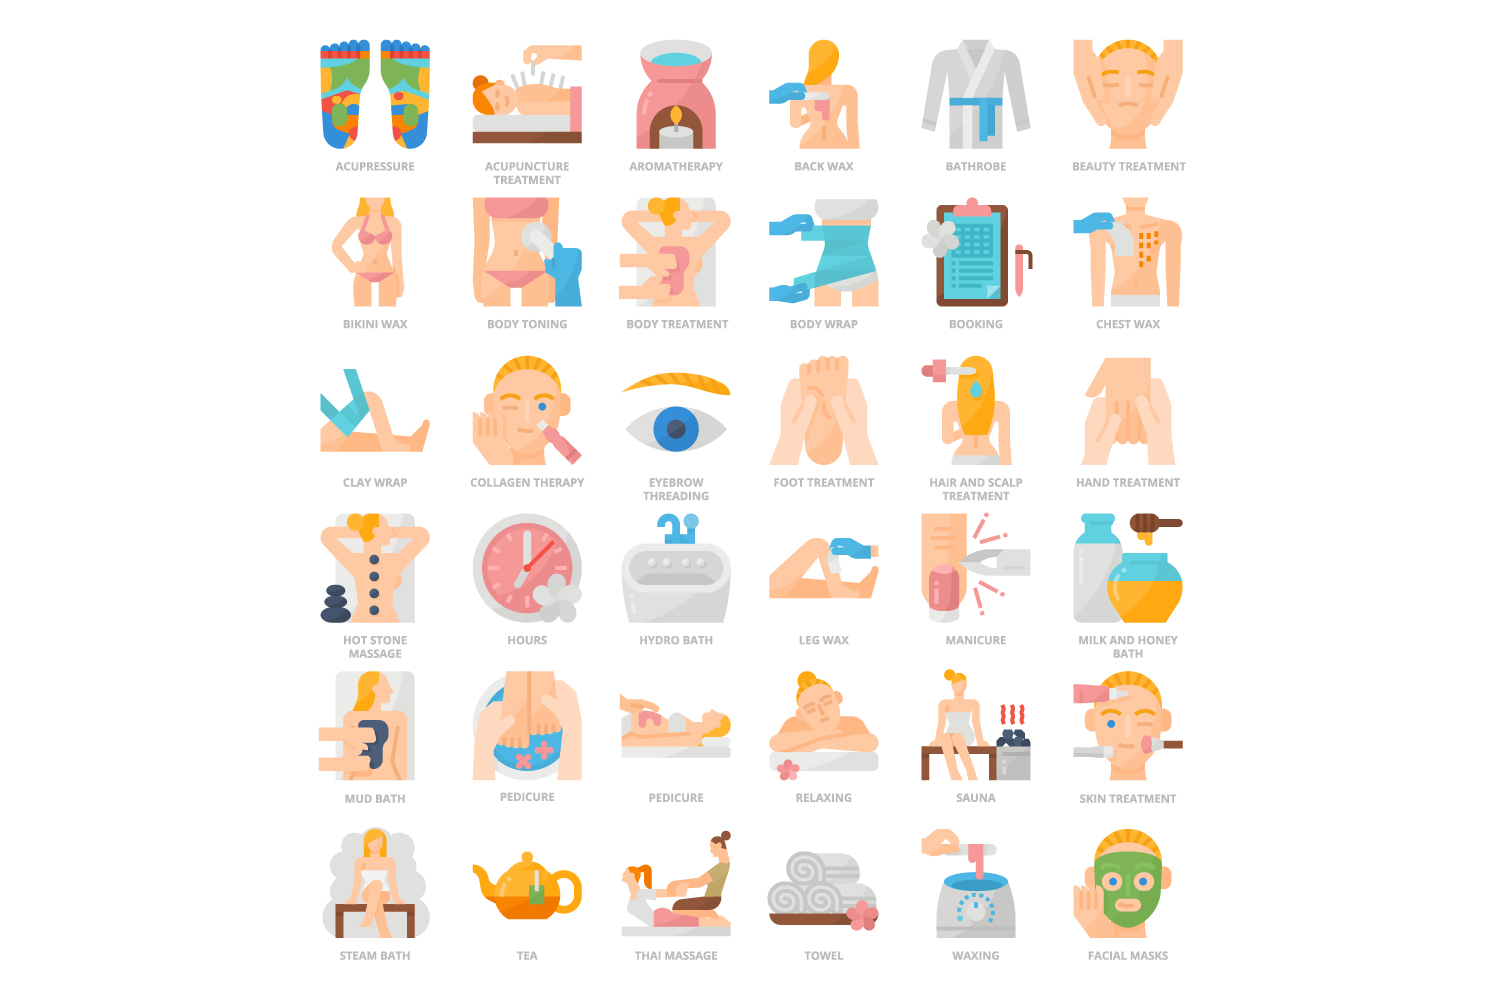 Poster of different types of body parts.